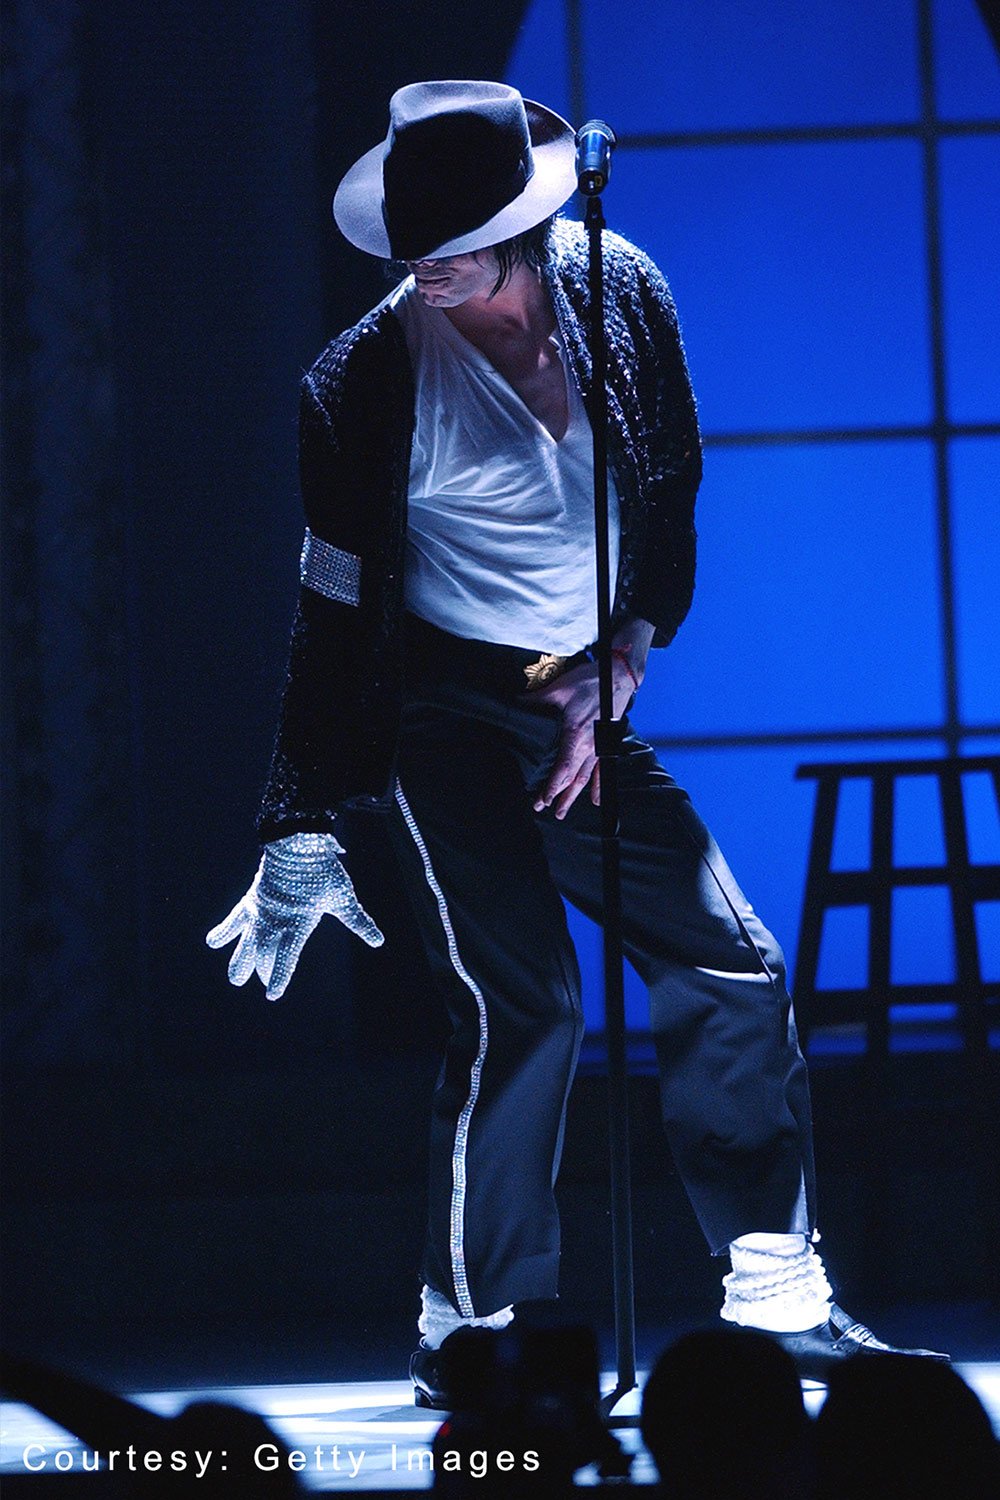 Michael Jackson performs during 30th Anniversary Celebration at Madison Square Garden in New York, NY, on September 7, 2001